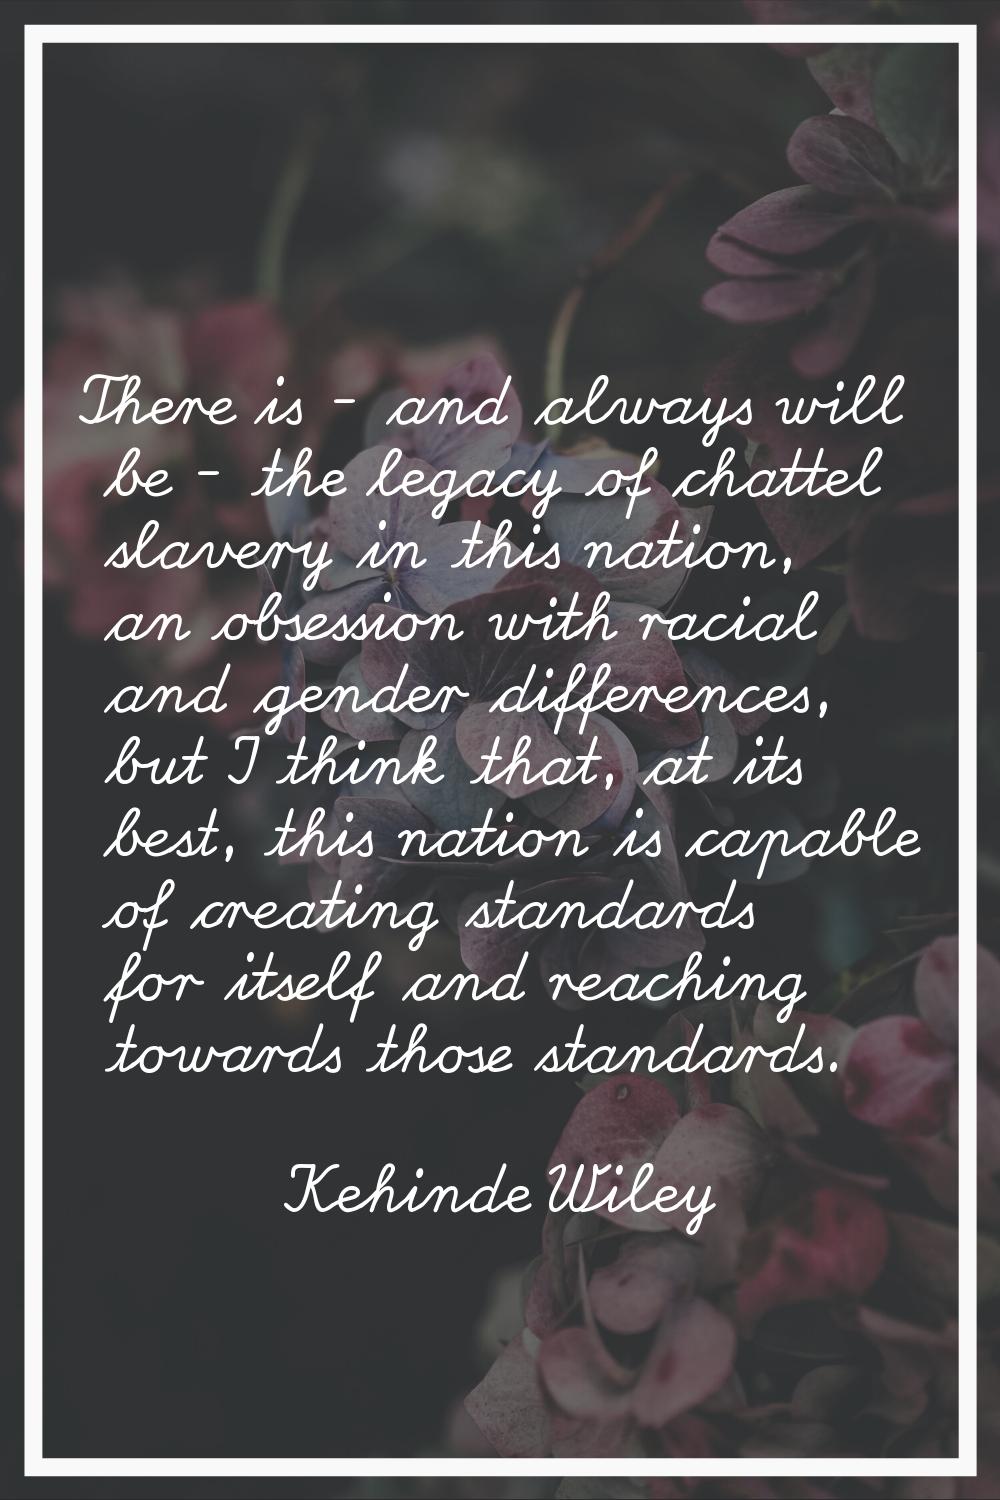 There is - and always will be - the legacy of chattel slavery in this nation, an obsession with rac